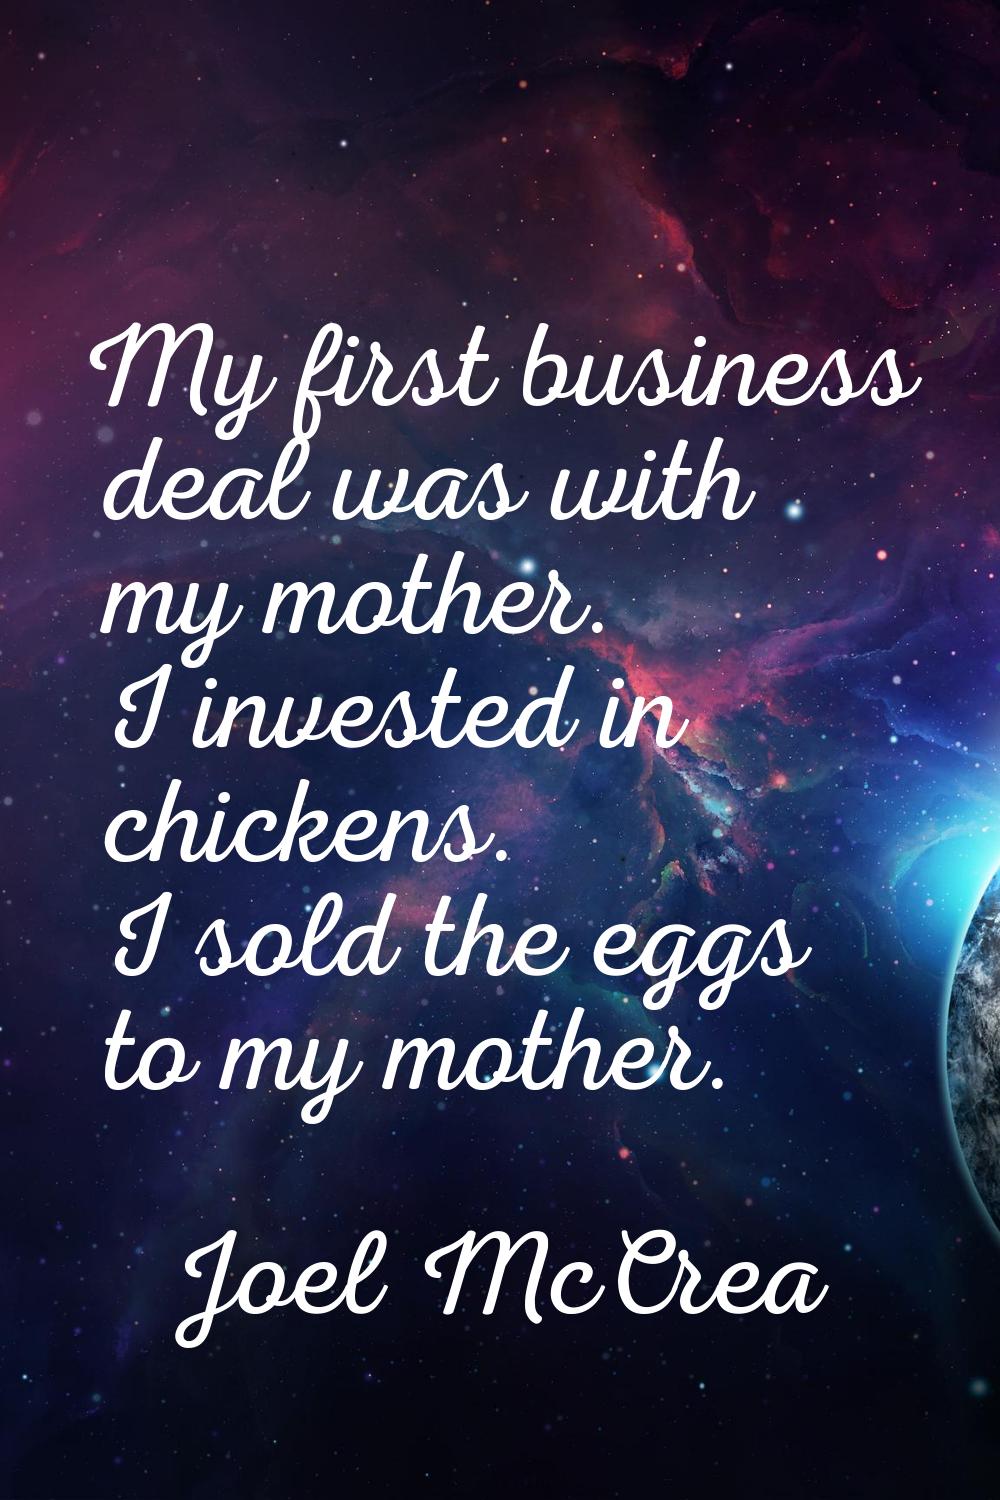 My first business deal was with my mother. I invested in chickens. I sold the eggs to my mother.